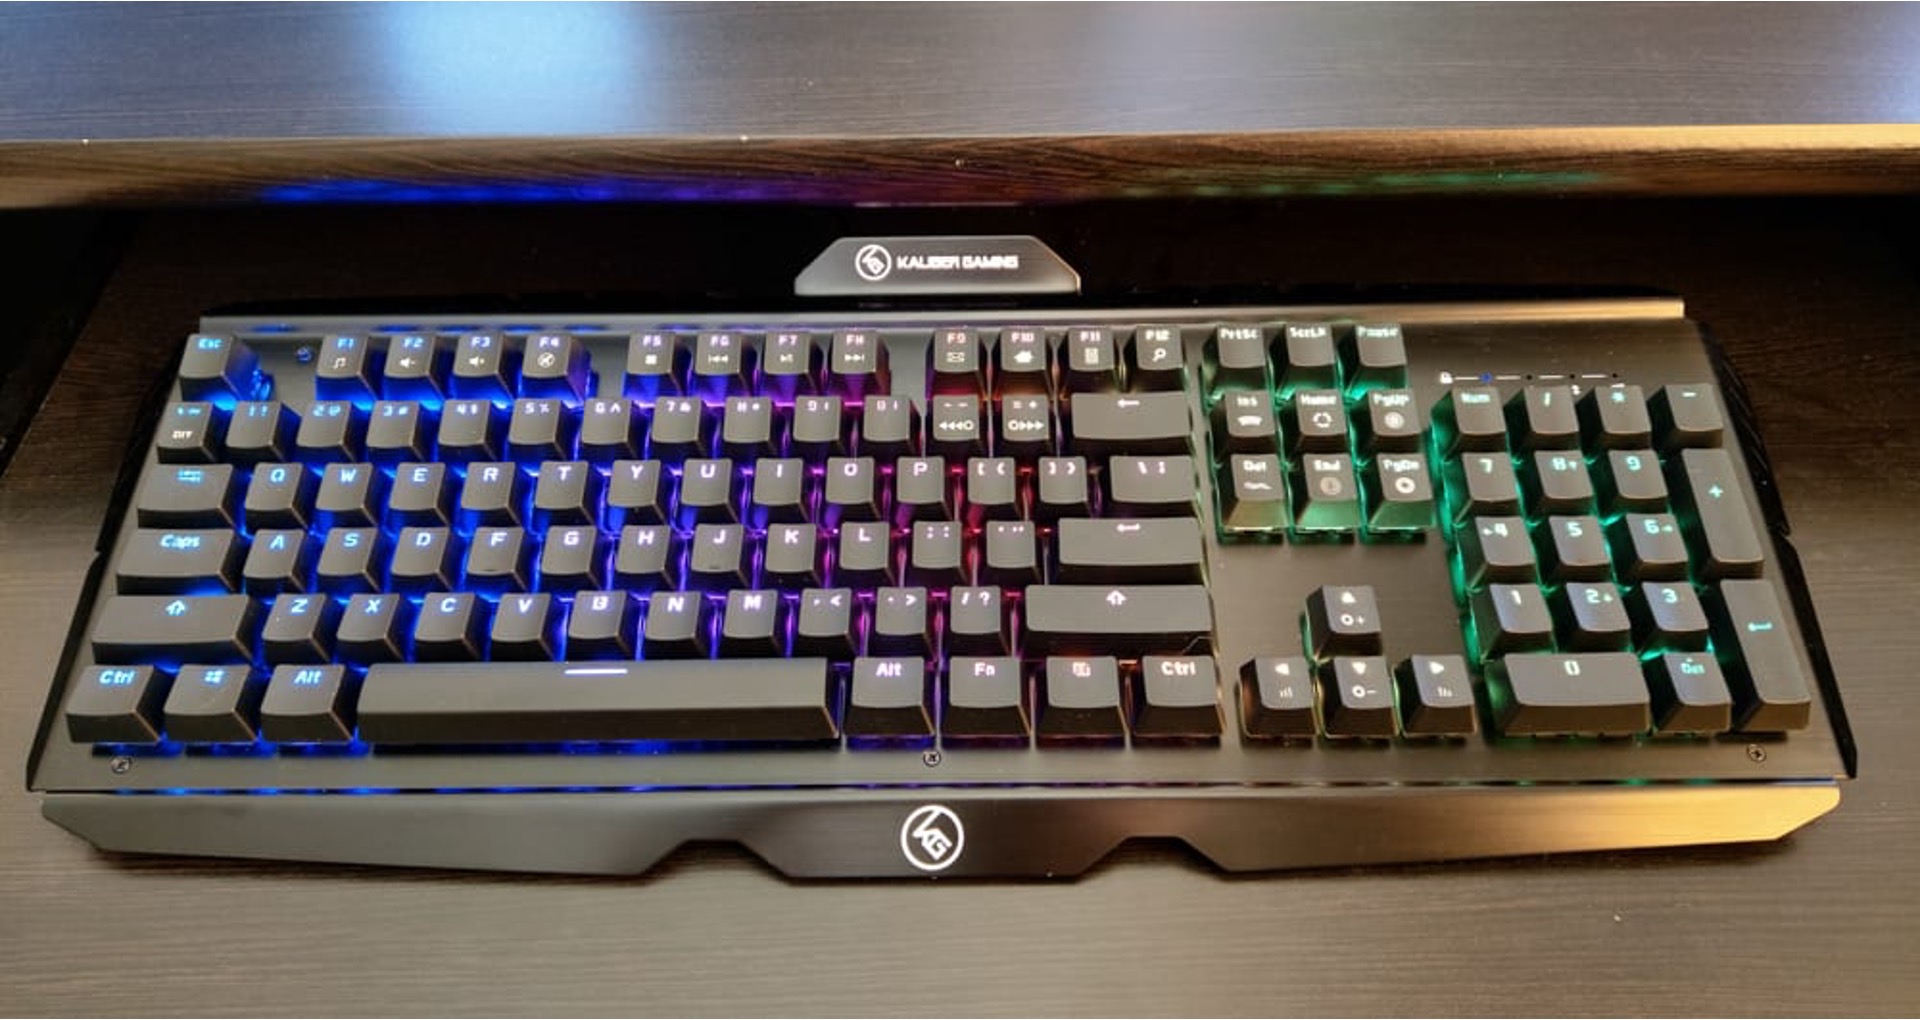 How To Change Color Of Kaliber Gaming Keyboard